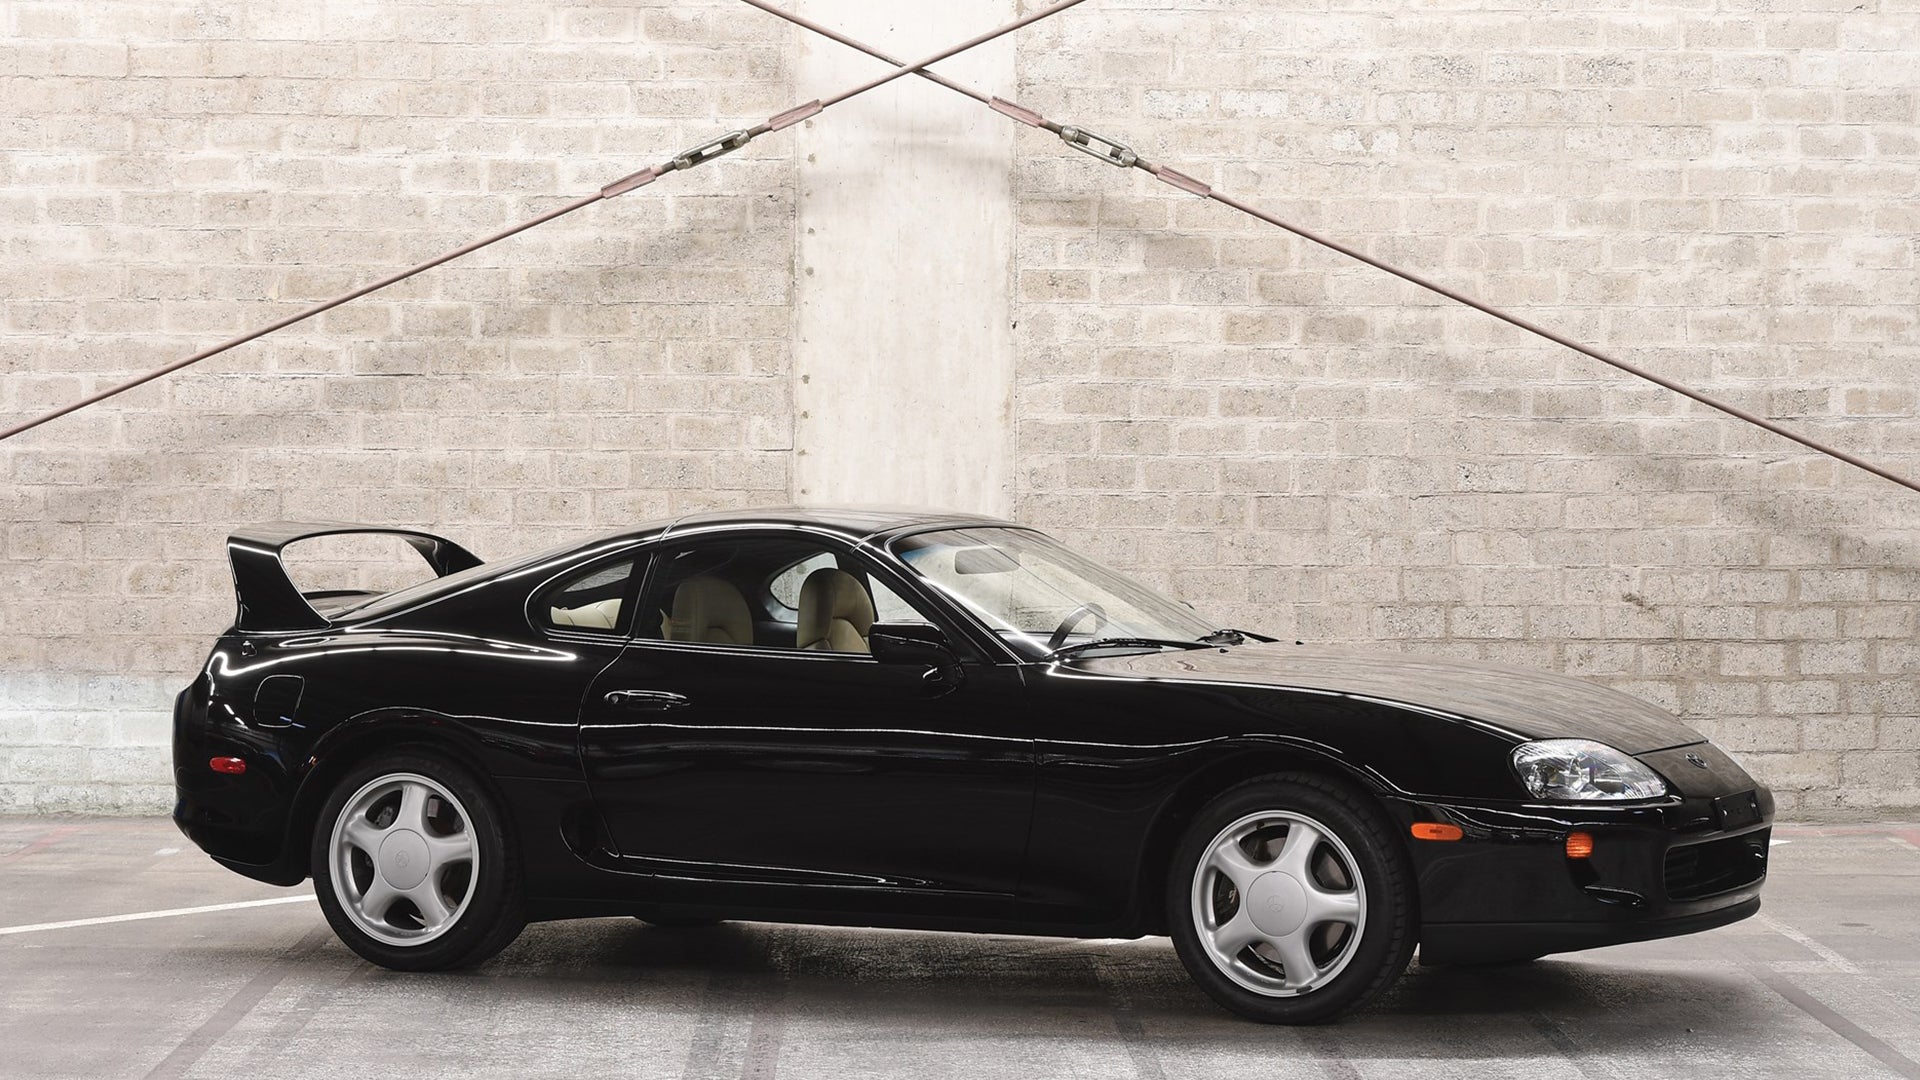 A 1994 Toyota Supra With 11 200 Miles Just Sold For A Monstrous 173 600